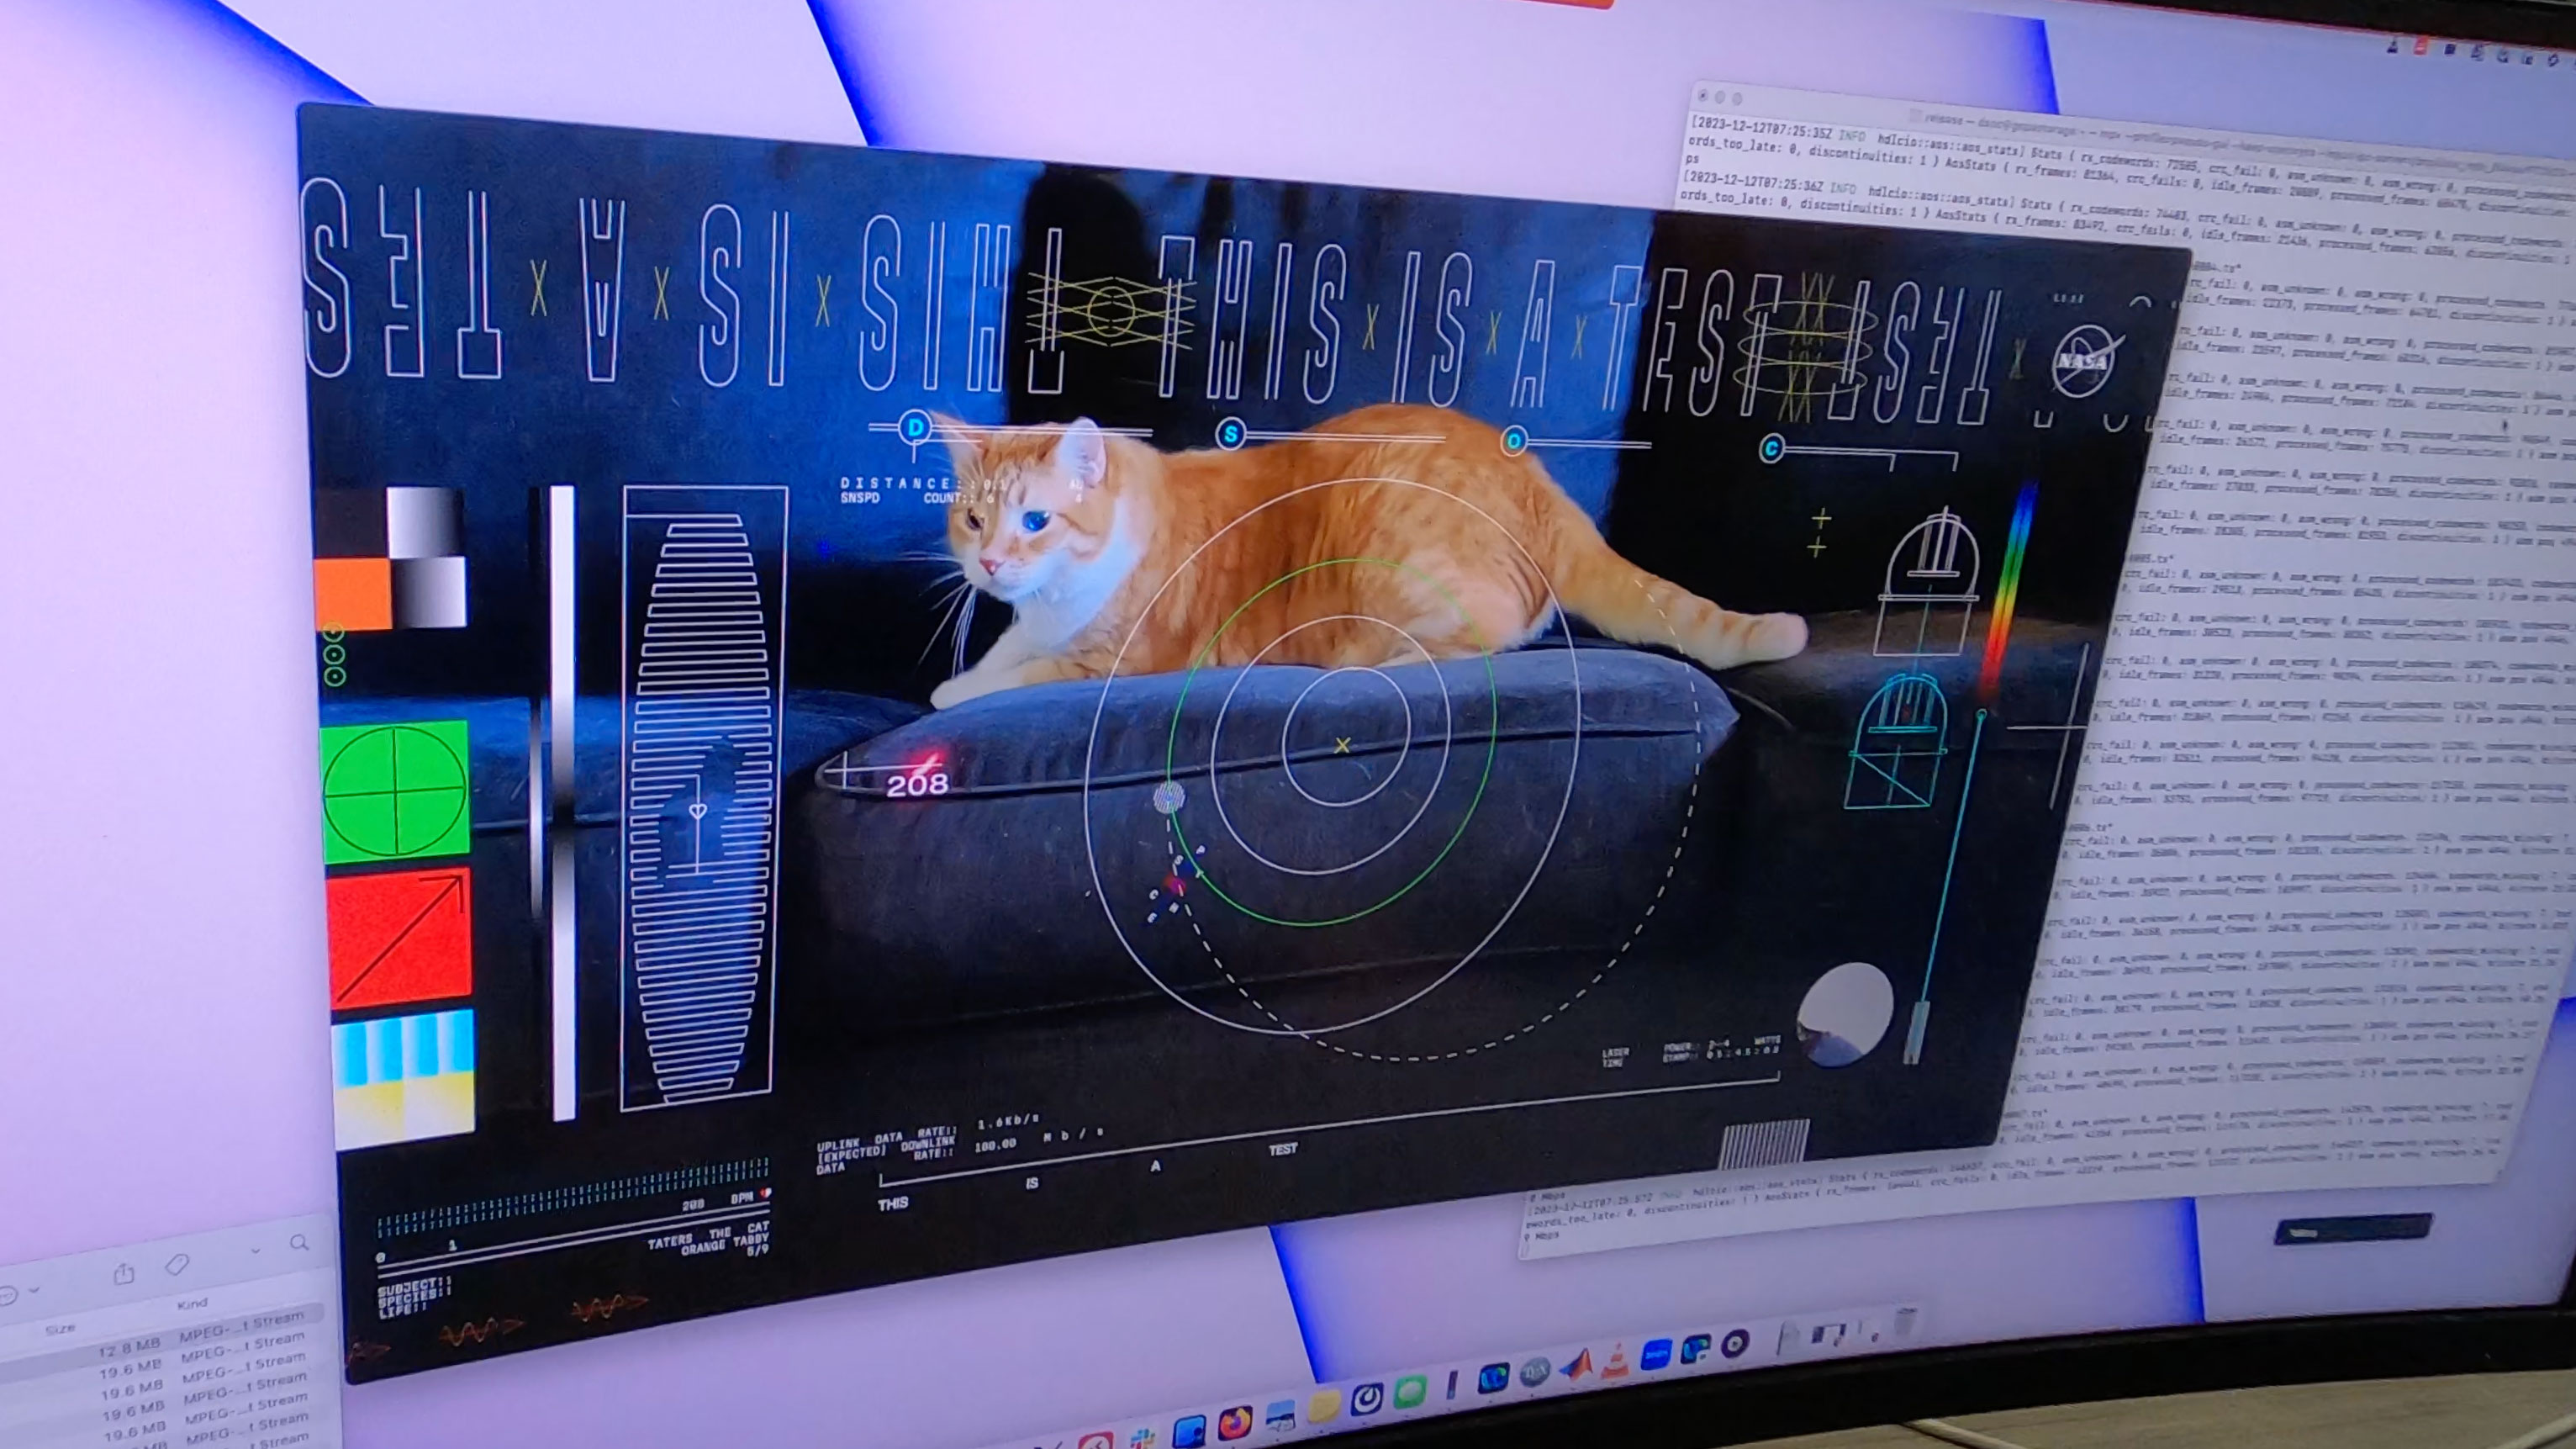 NASA laser-beams adorable cat video to Earth from 19 million miles away (video)